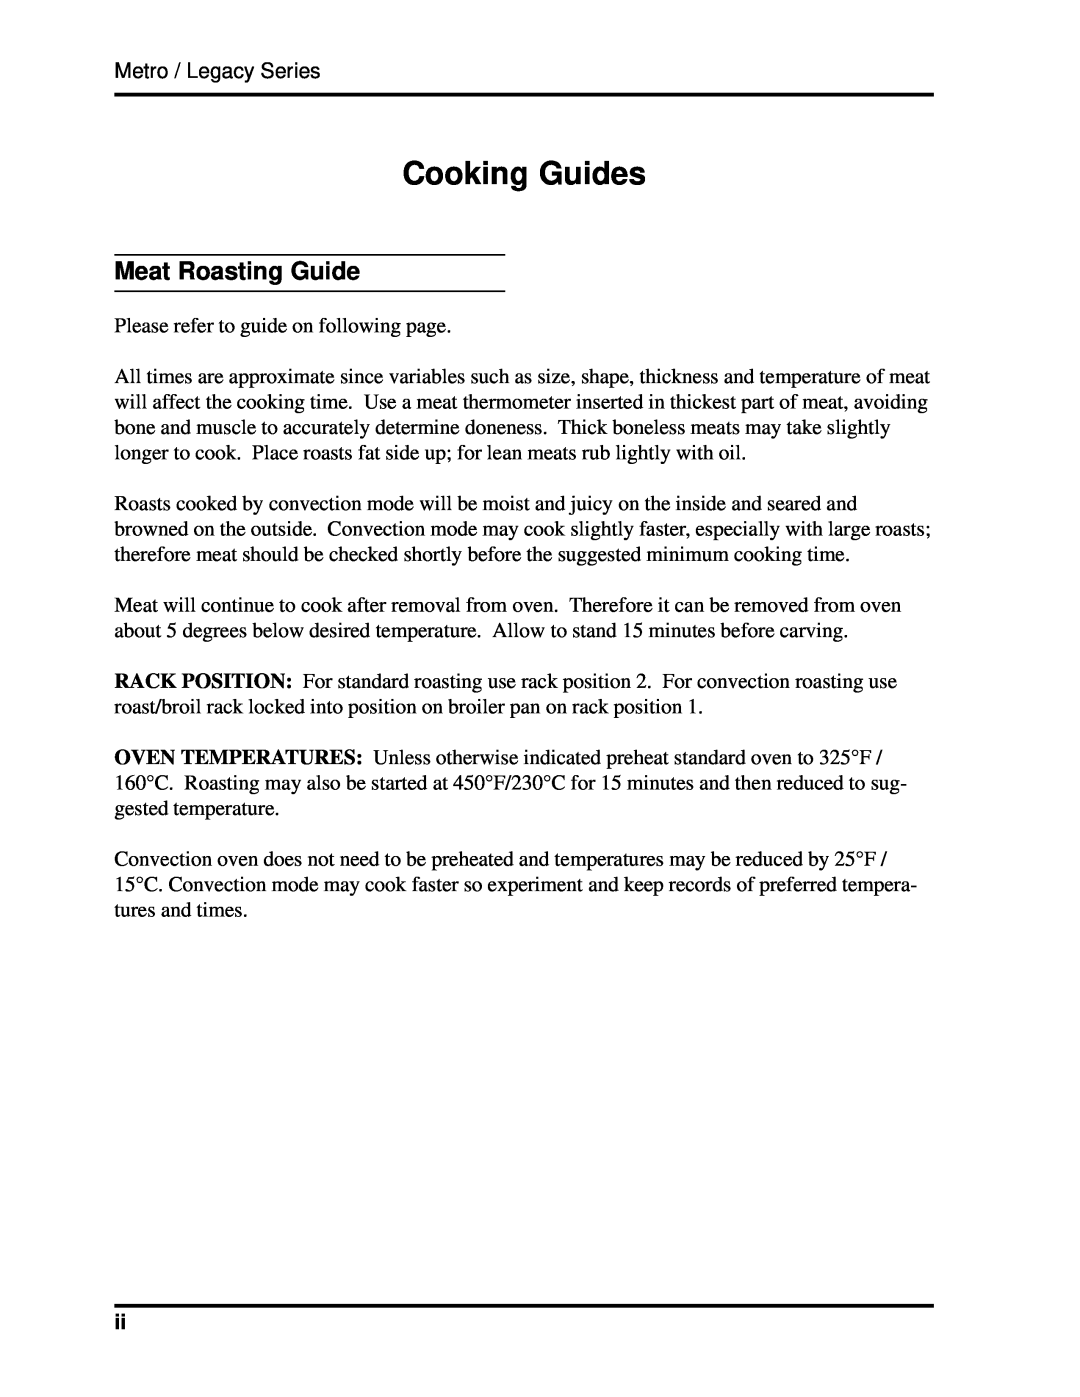 Heartland 3630, 3530 installation and operation guide Cooking Guides, Meat Roasting Guide 